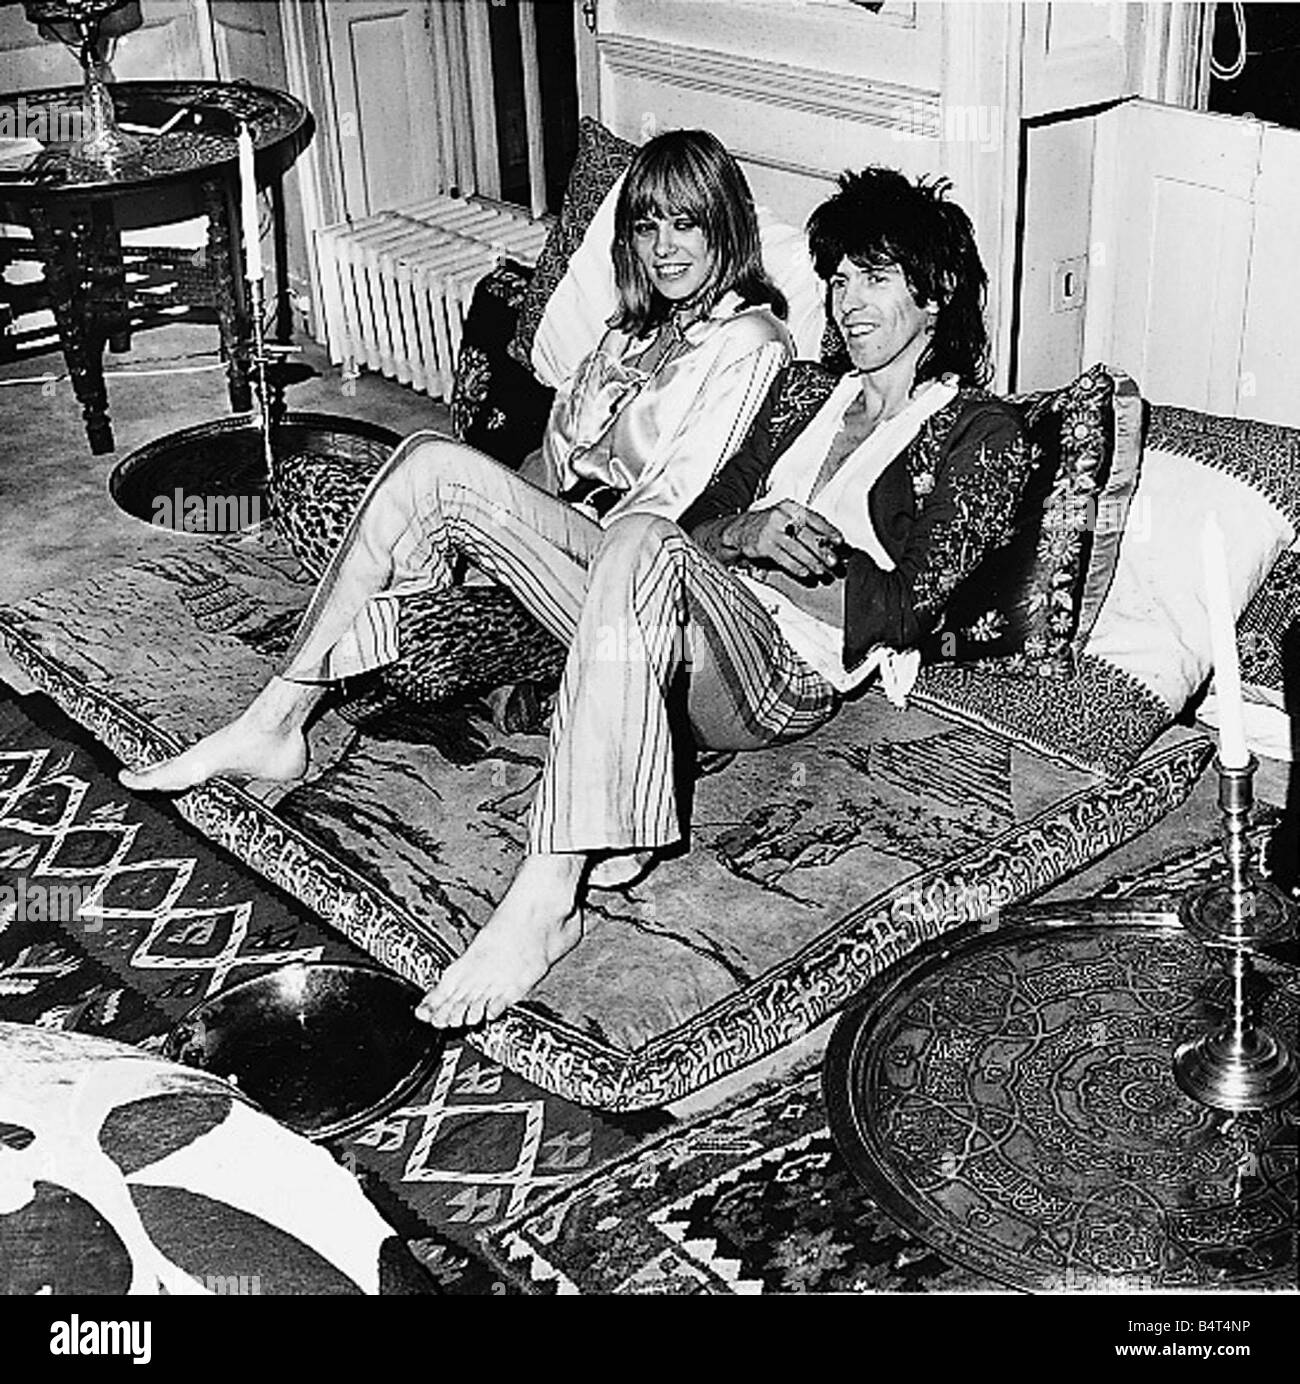 Rolling Stones guitarist Keith Richards seen here with Antia Pallenberg ...